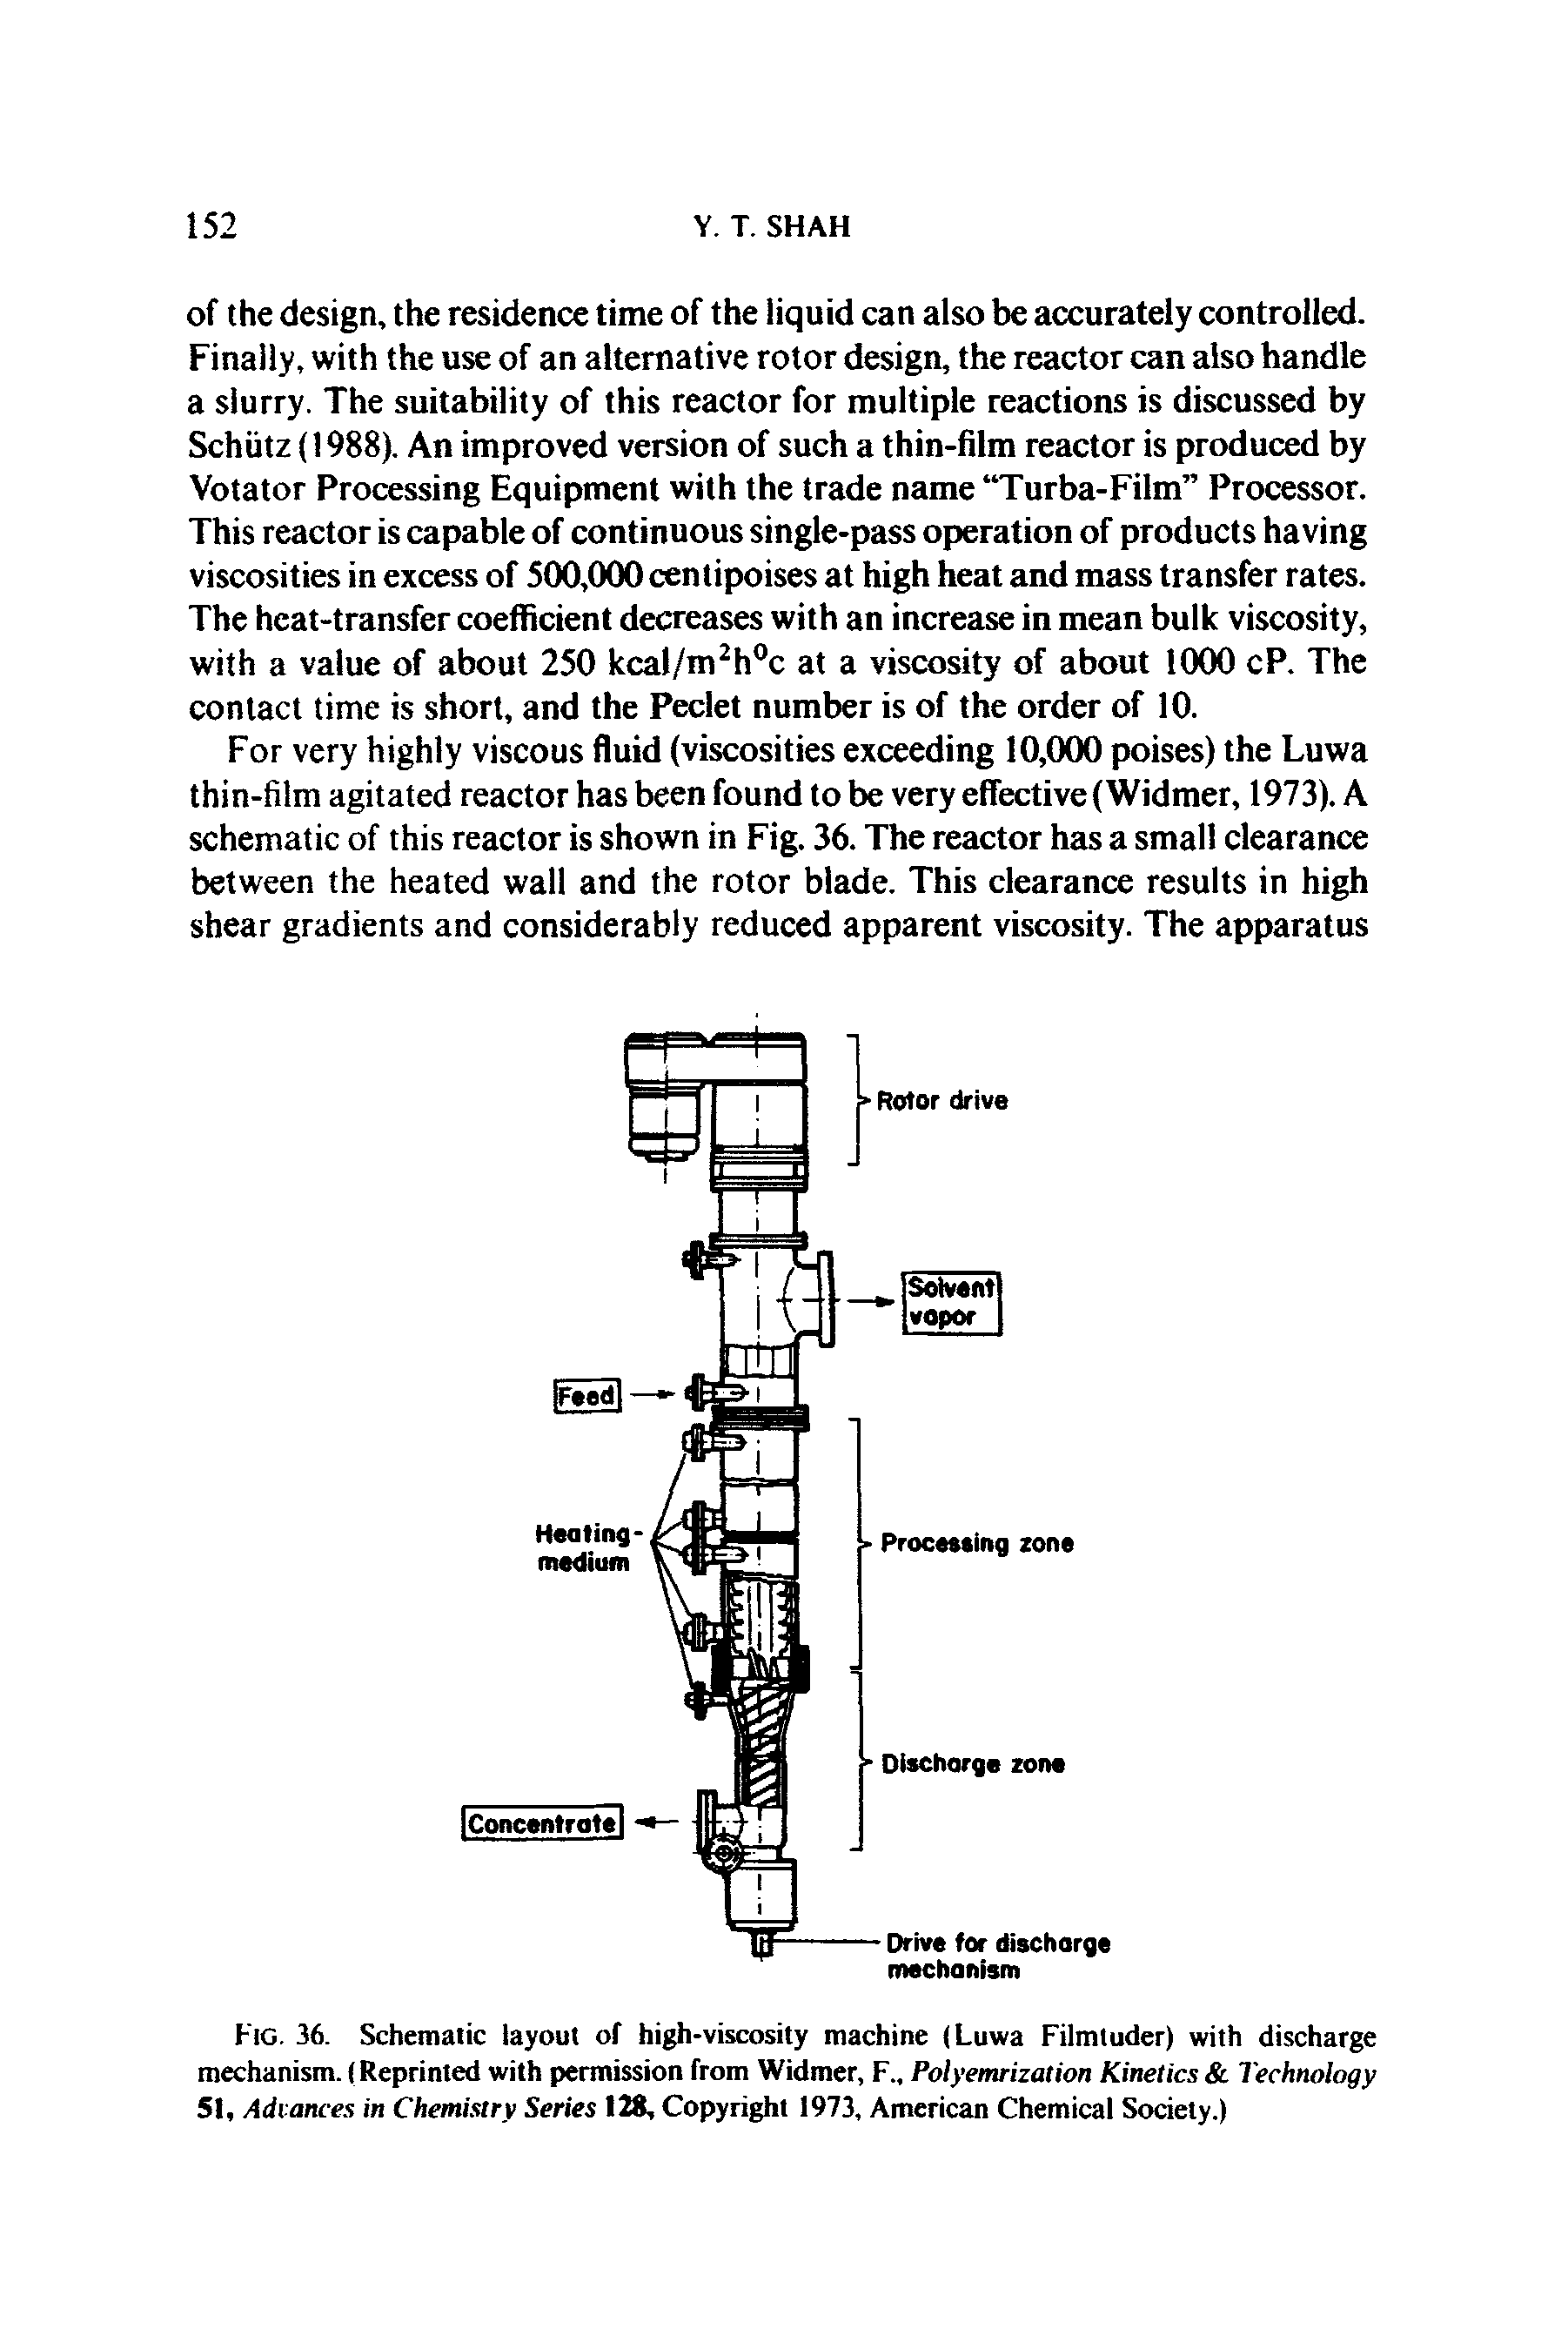 Fig. 36. Schematic layout of high-viscosity machine (Luwa Filmtuder) with discharge mechanism. (Reprinted with permission from Widmer, F Polyemrization Kinetics Technology 51, Advances in Chemistry Series 128, Copyright 1973, American Chemical Society.)...